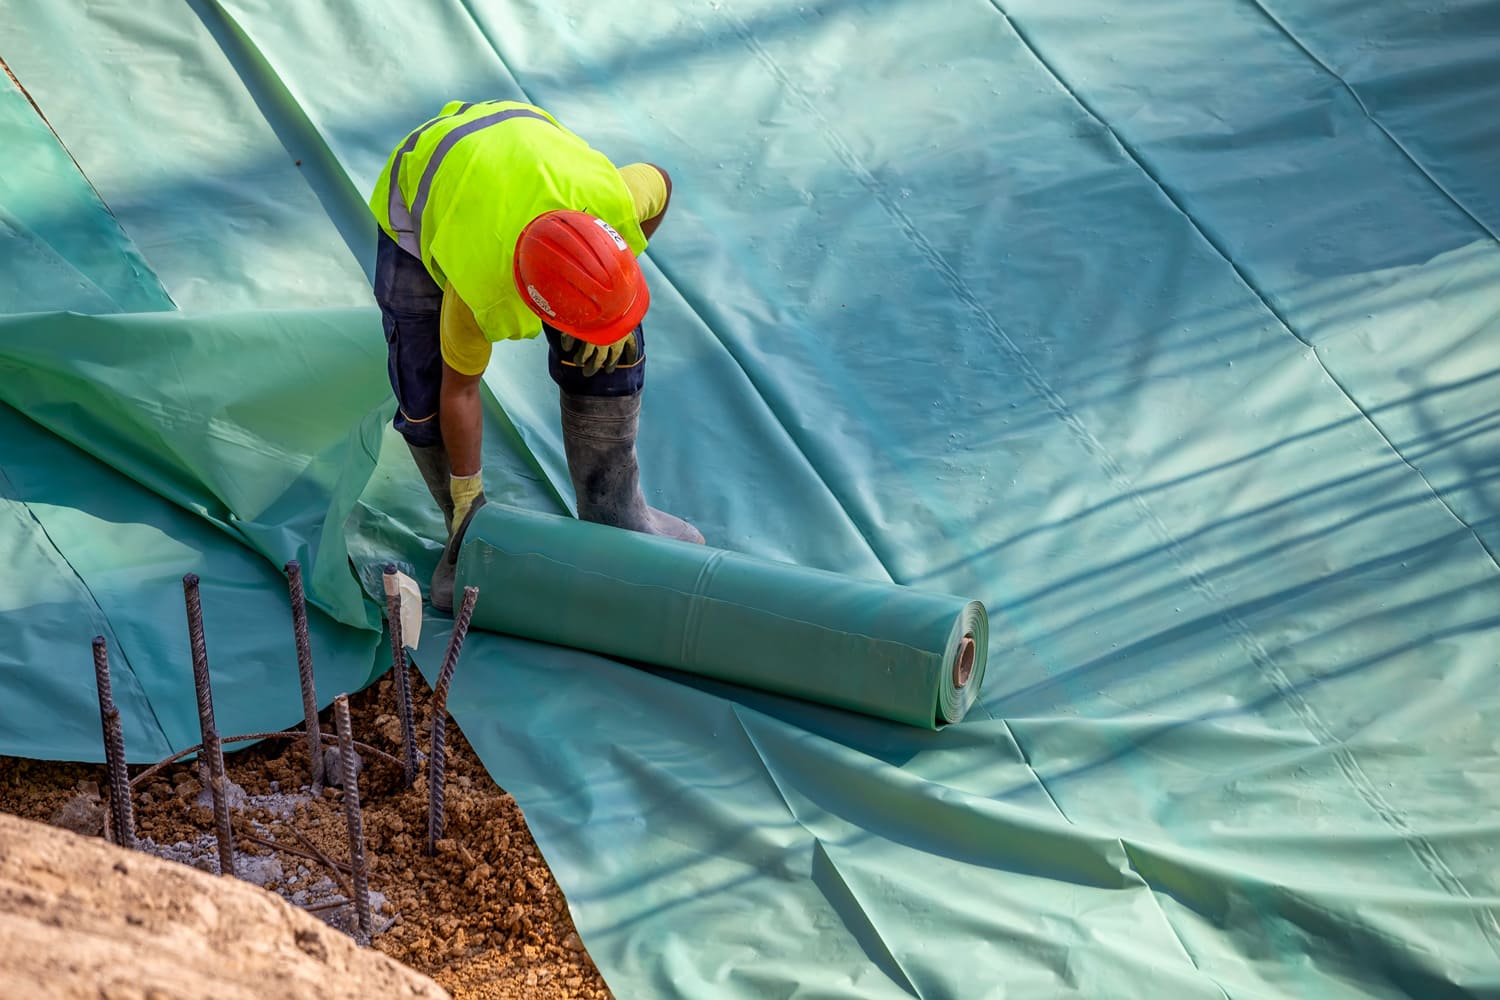 Installing plastic vapor barrier before pouring concrete slab, helping to prevent moisture from migrating up from the dirt and creating a wet slab.